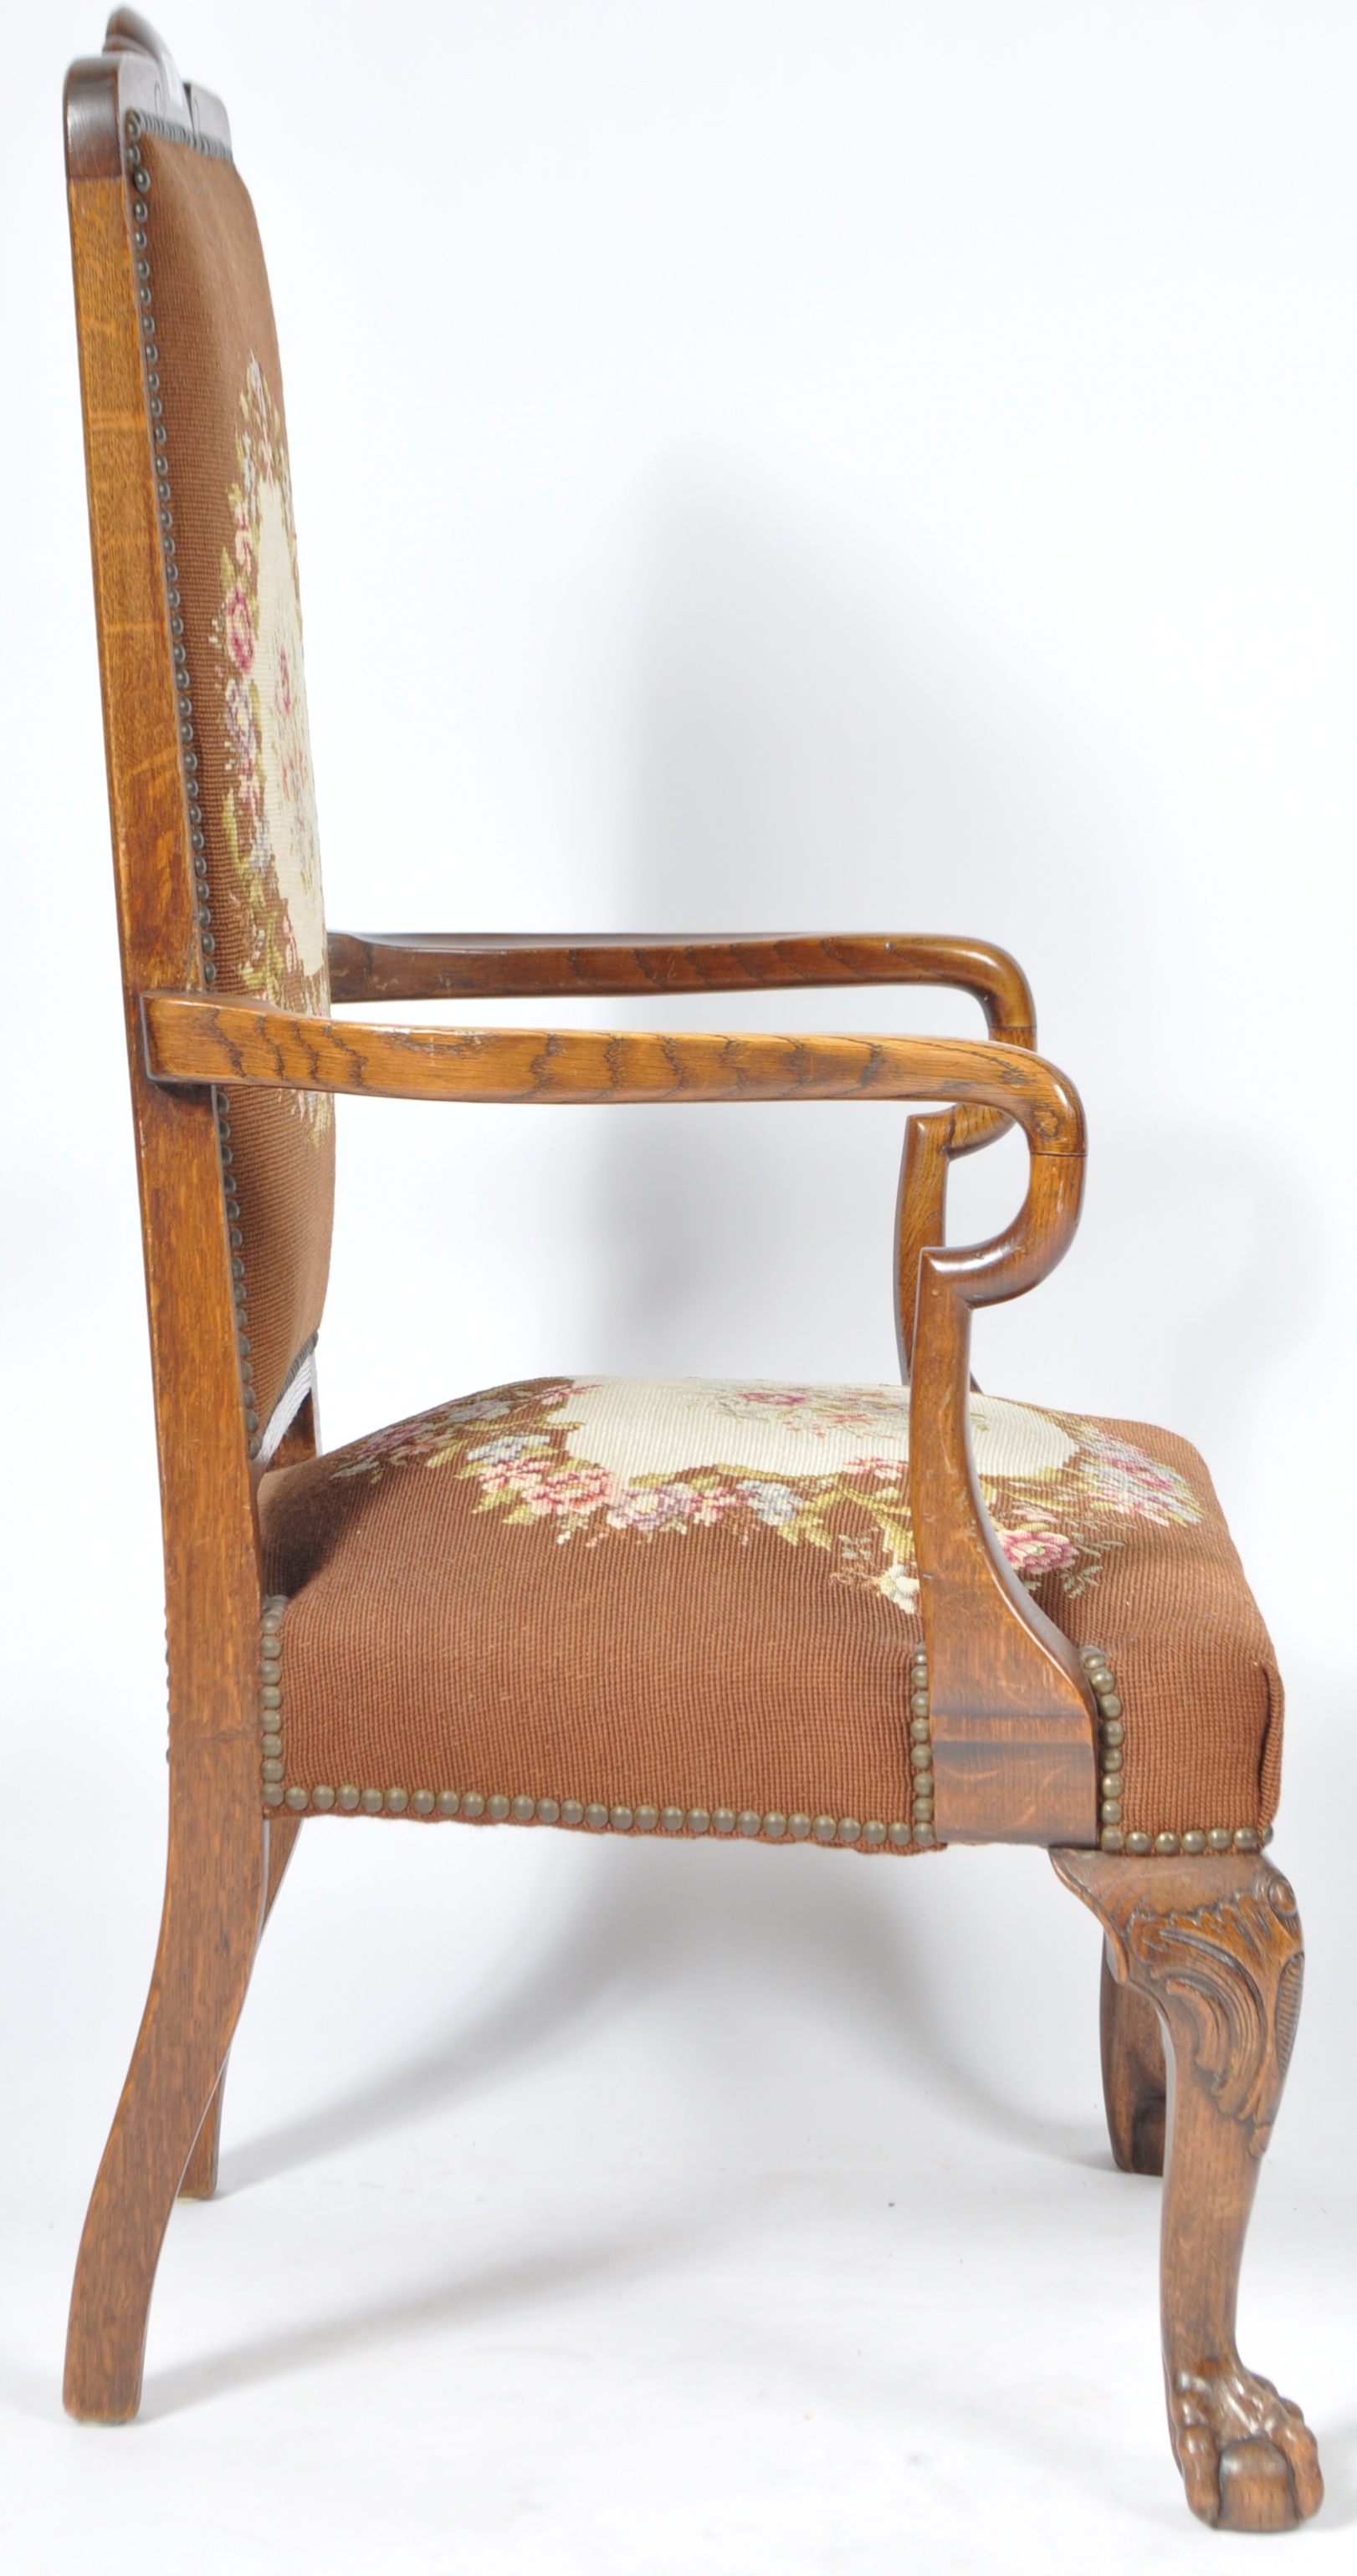 19TH CENTURY QUEEN ANNE REVIVAL OAK TAPESTRY ARMCHAIR - Image 6 of 8